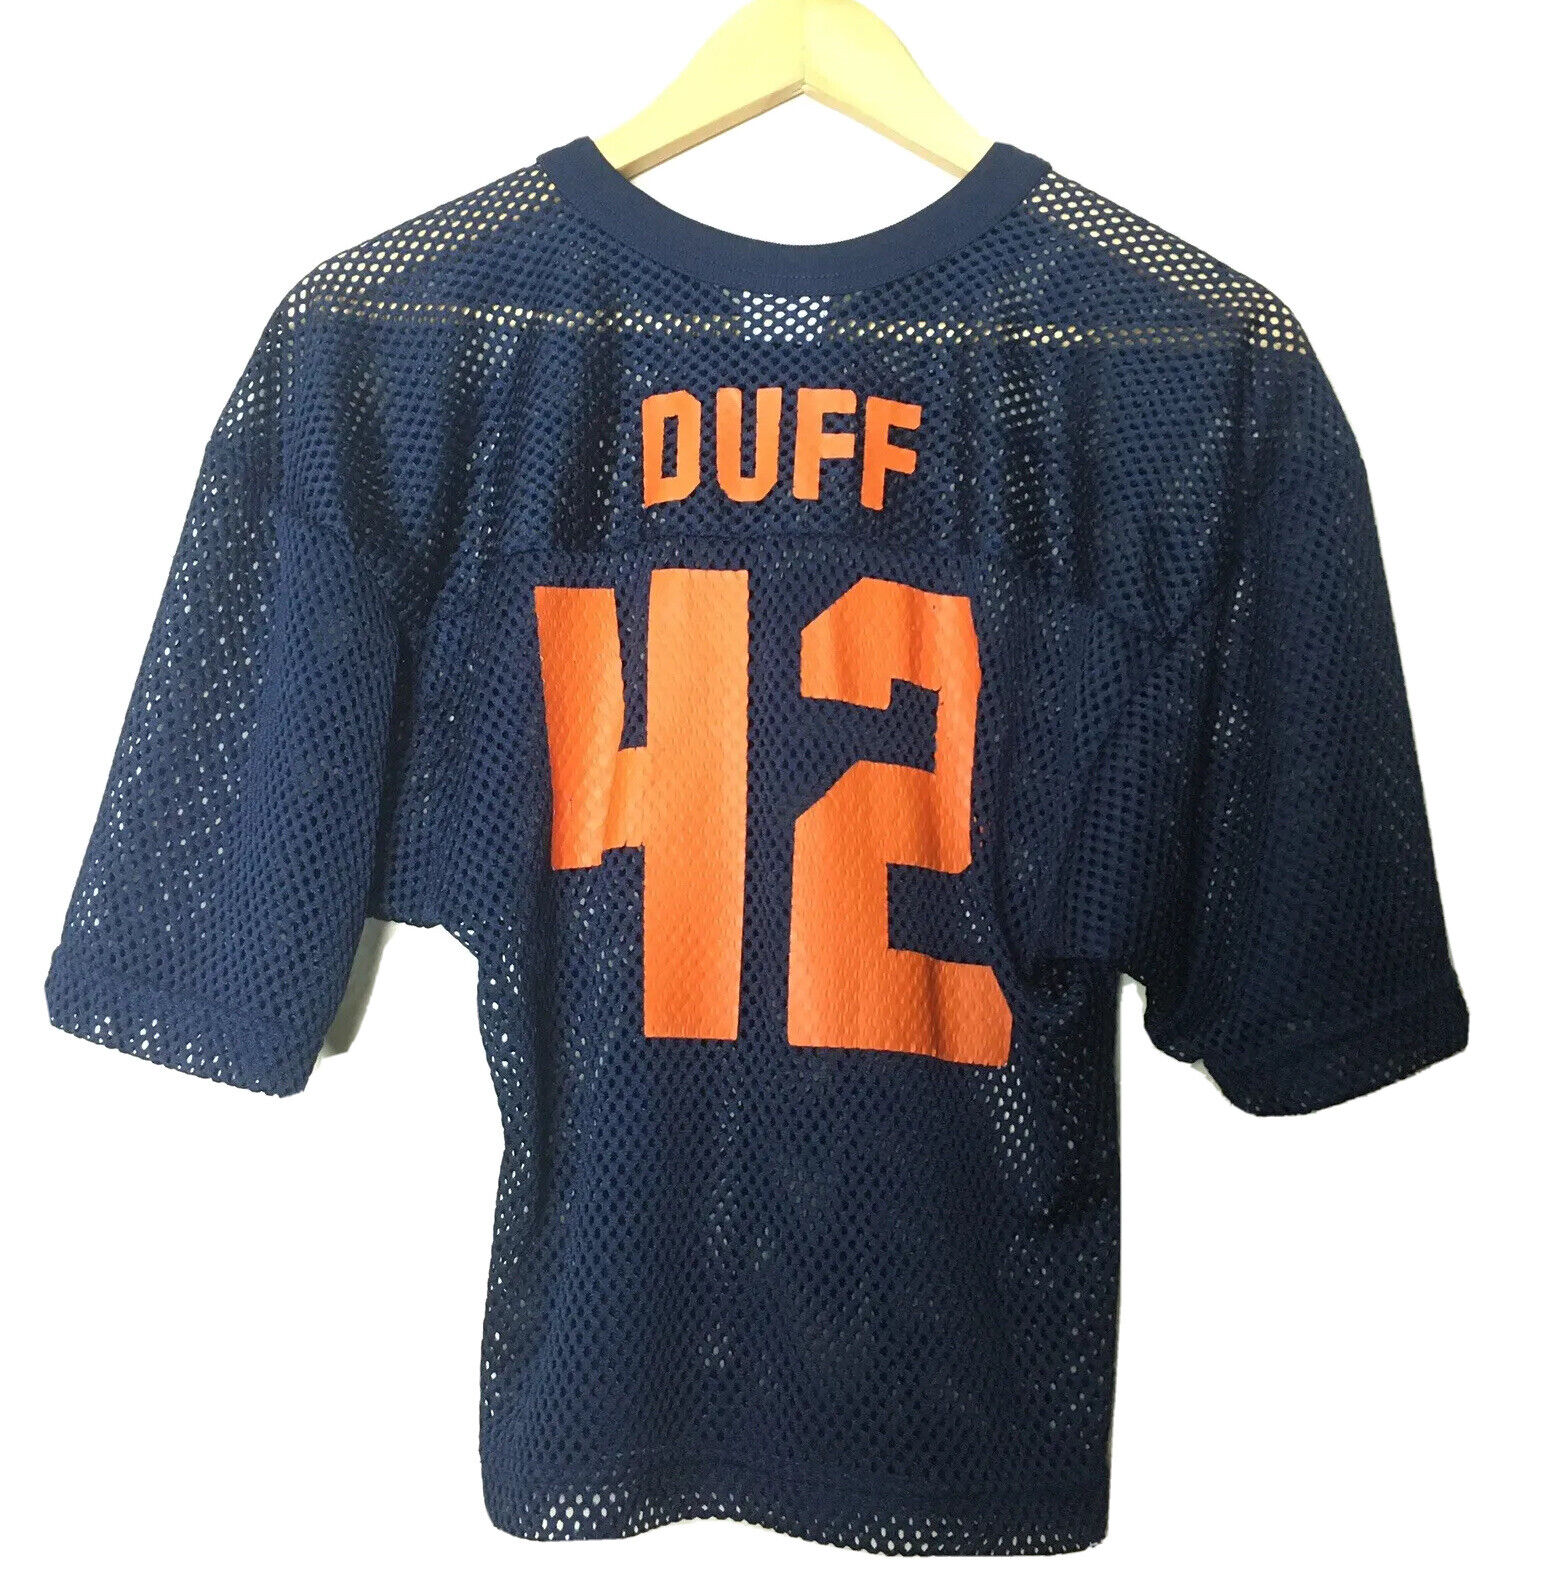 Vintage Mesh Jersey 1990s Navy Blue Football Jersey Duff #42 Youth Rawling M